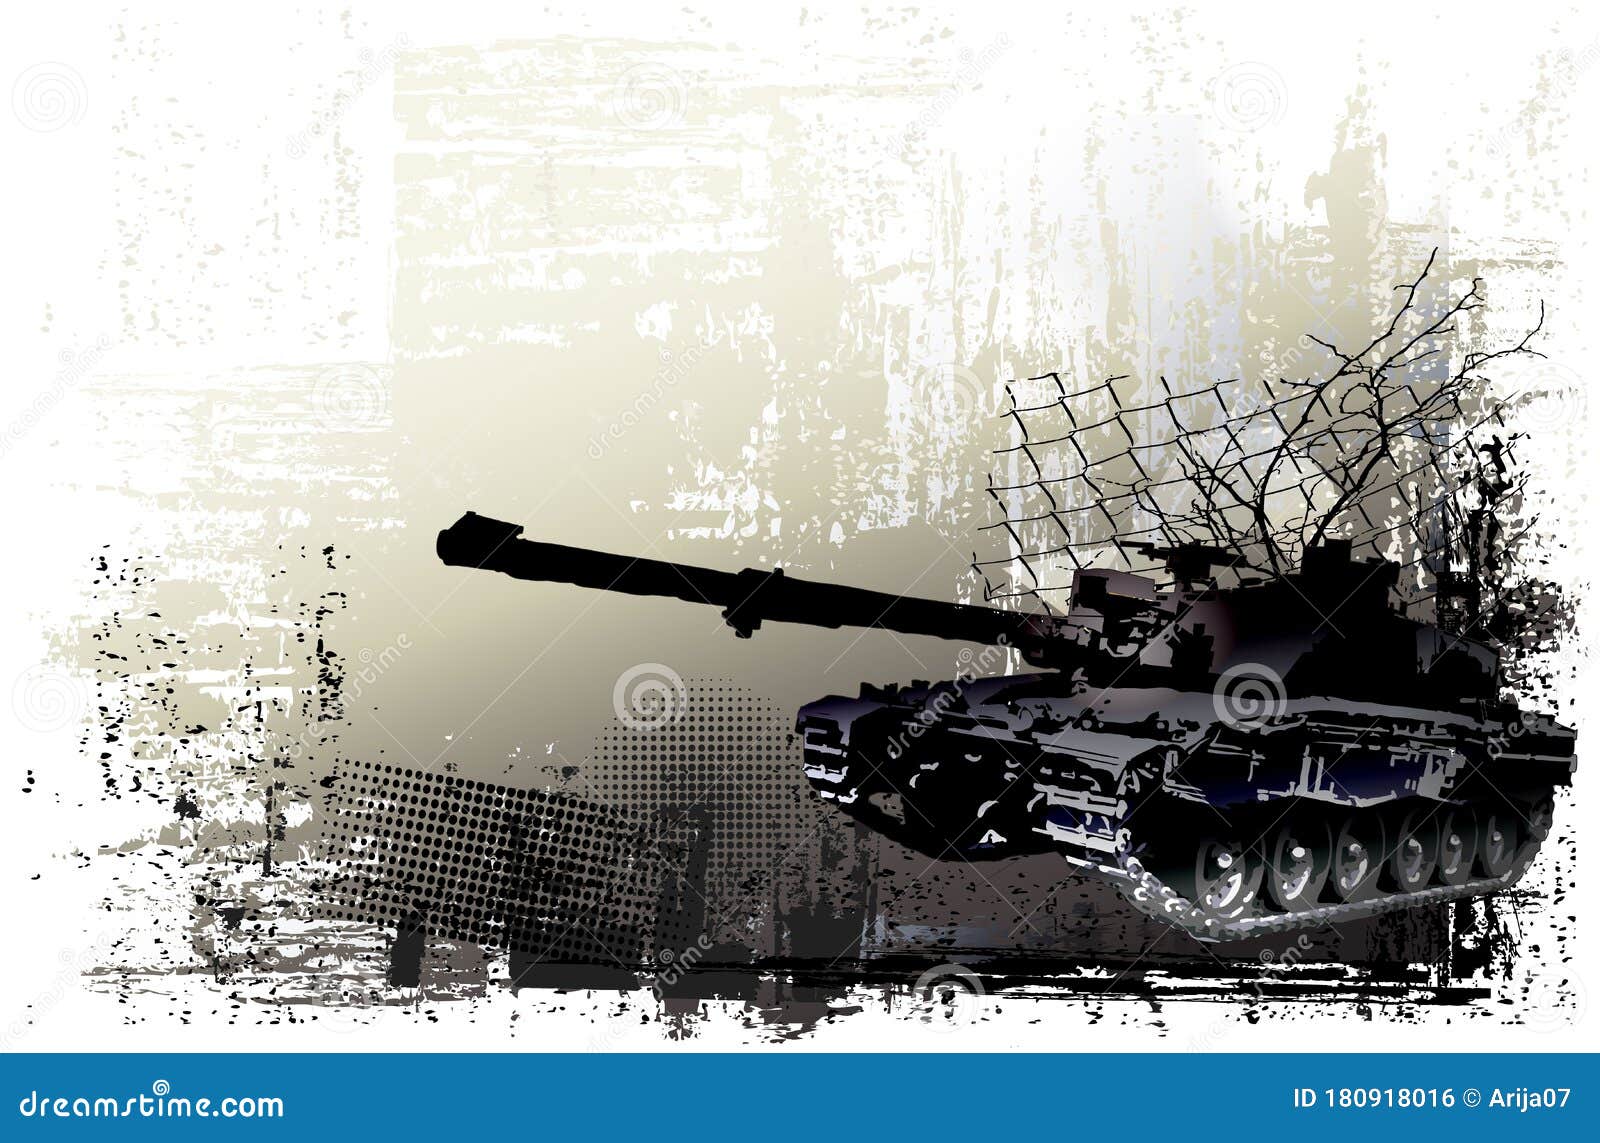 military army war tank. weapon of war army and warfare background